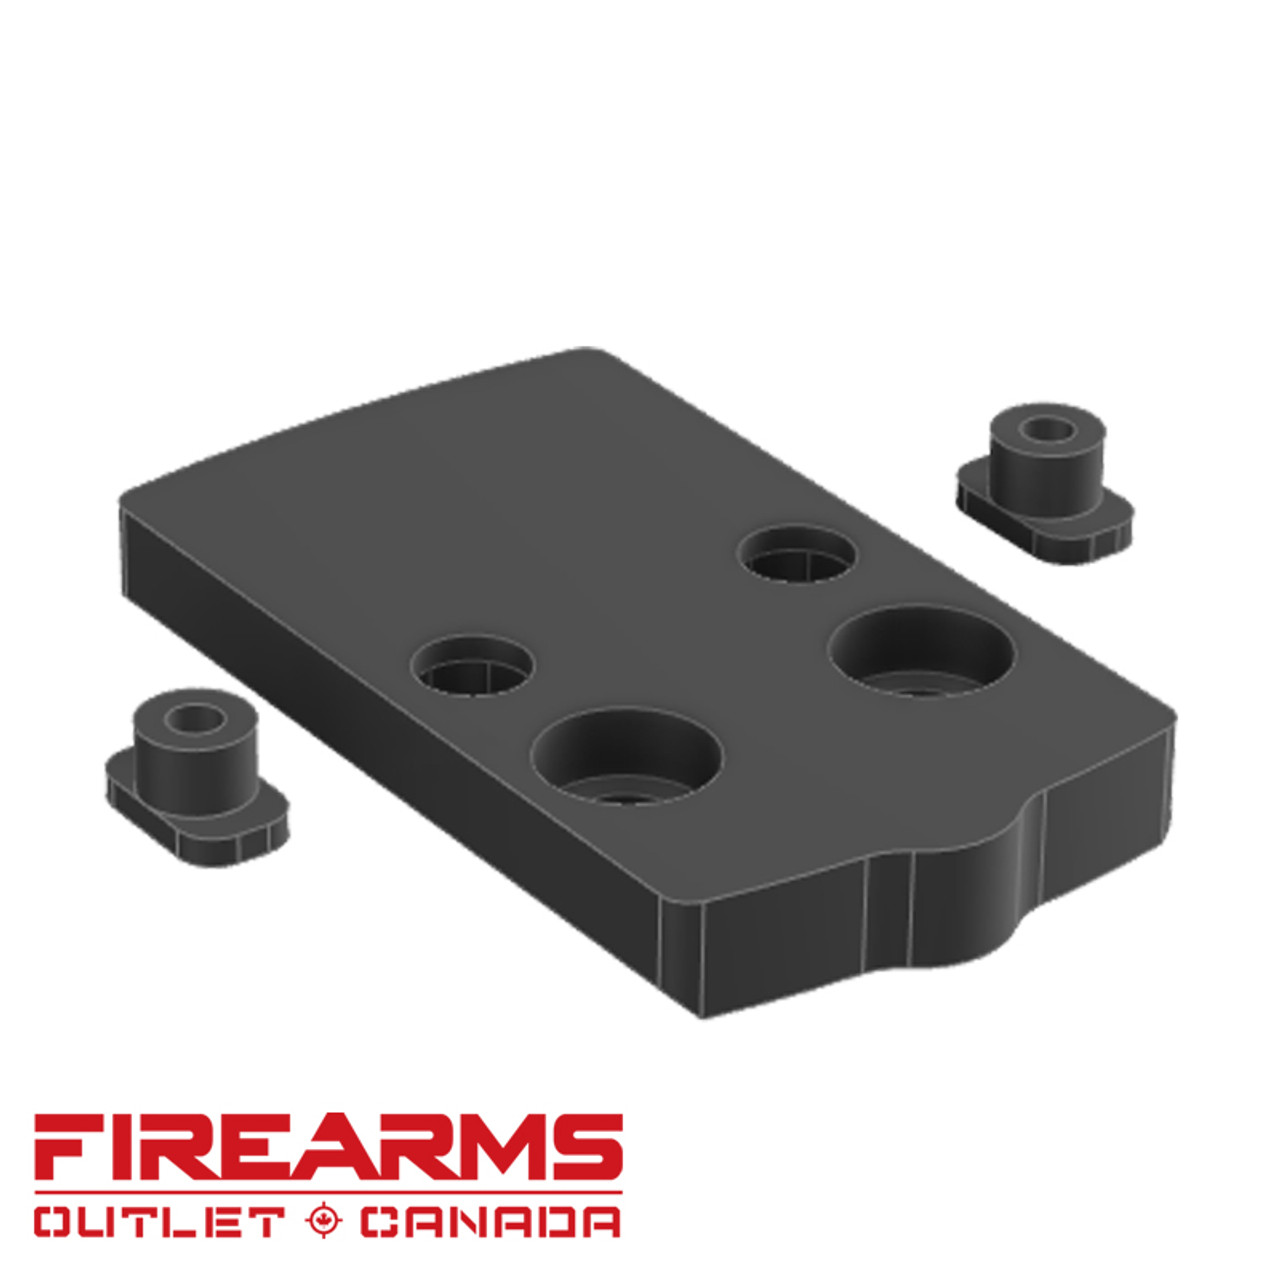 C&H Precision Weapons V4 MIL/LEO RMRcc Adapter Plate - Fits Glock 43X/48 MOS [GLX-RMRcc]